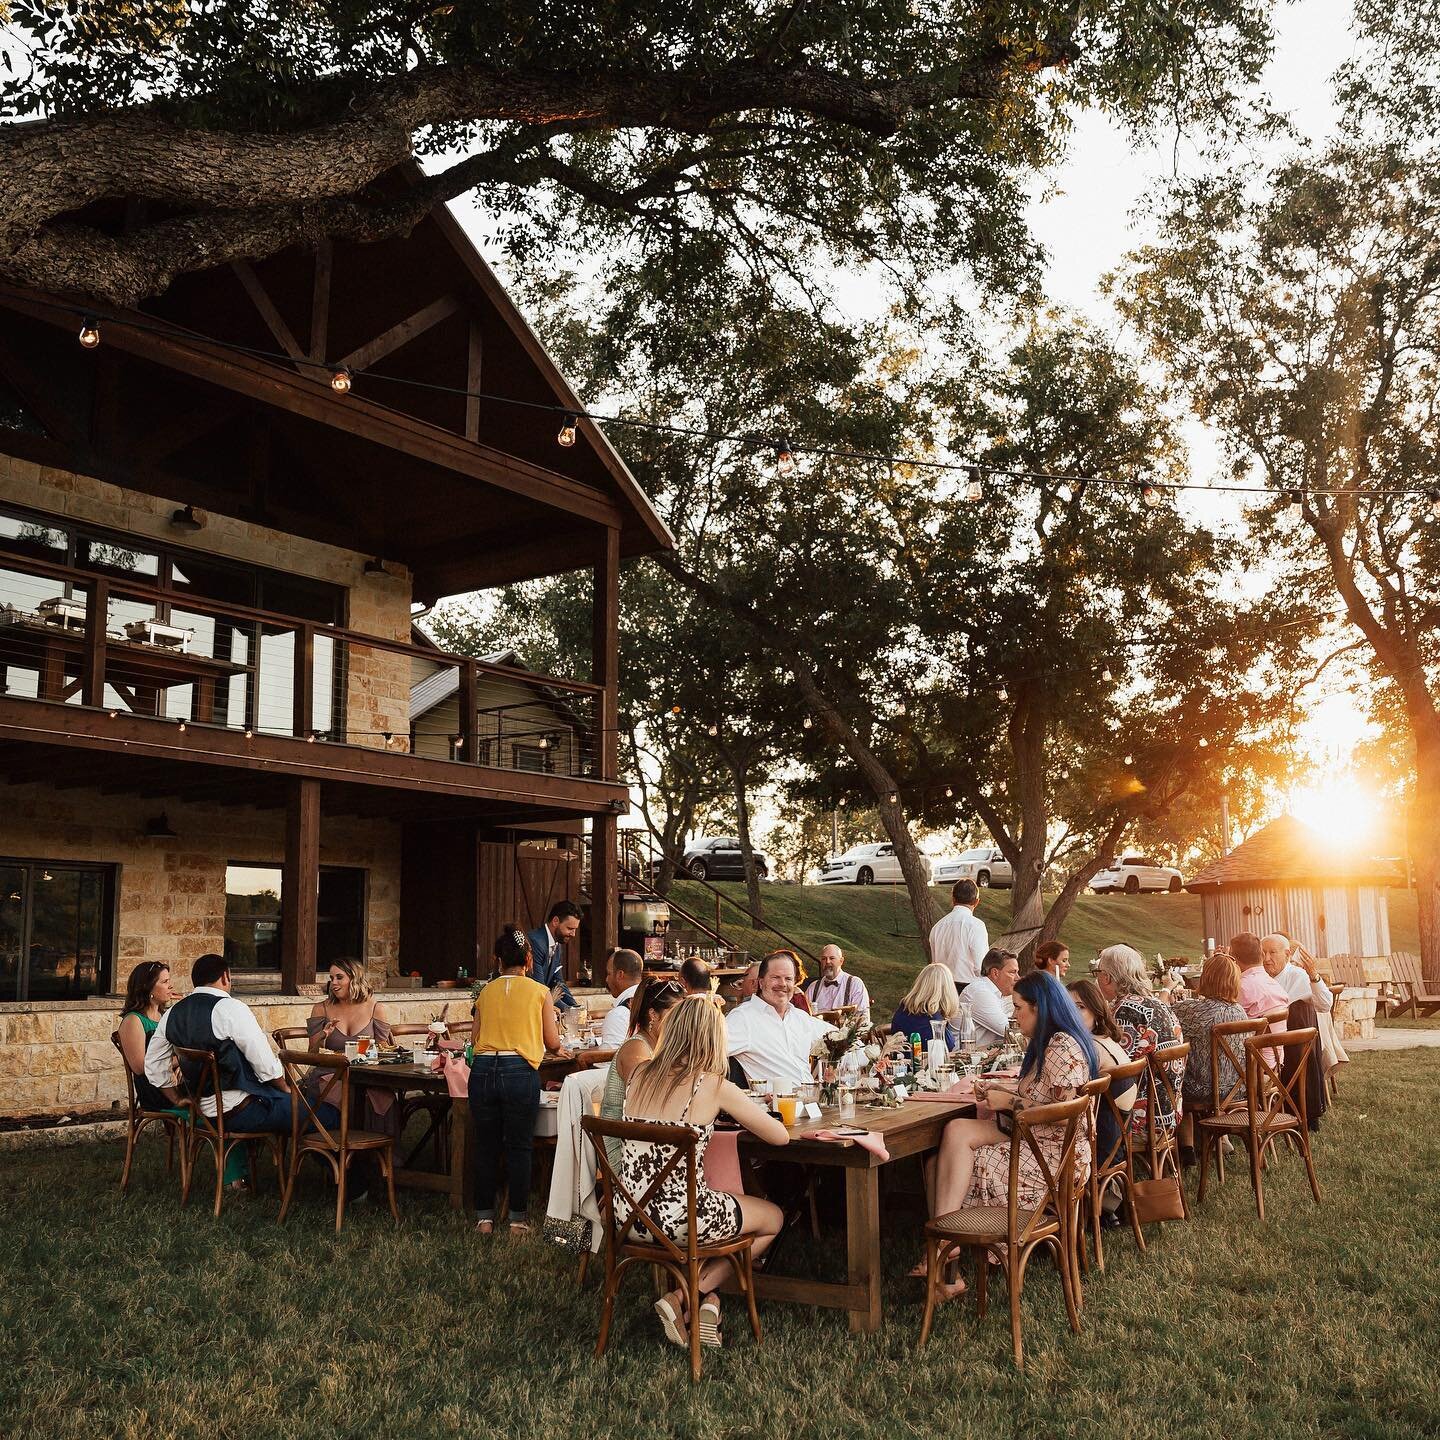 Three of my very favorite wedding things: outdoor golden hour receptions, laid back atmospheres, and your loved ones toasting to your forever✨🥂